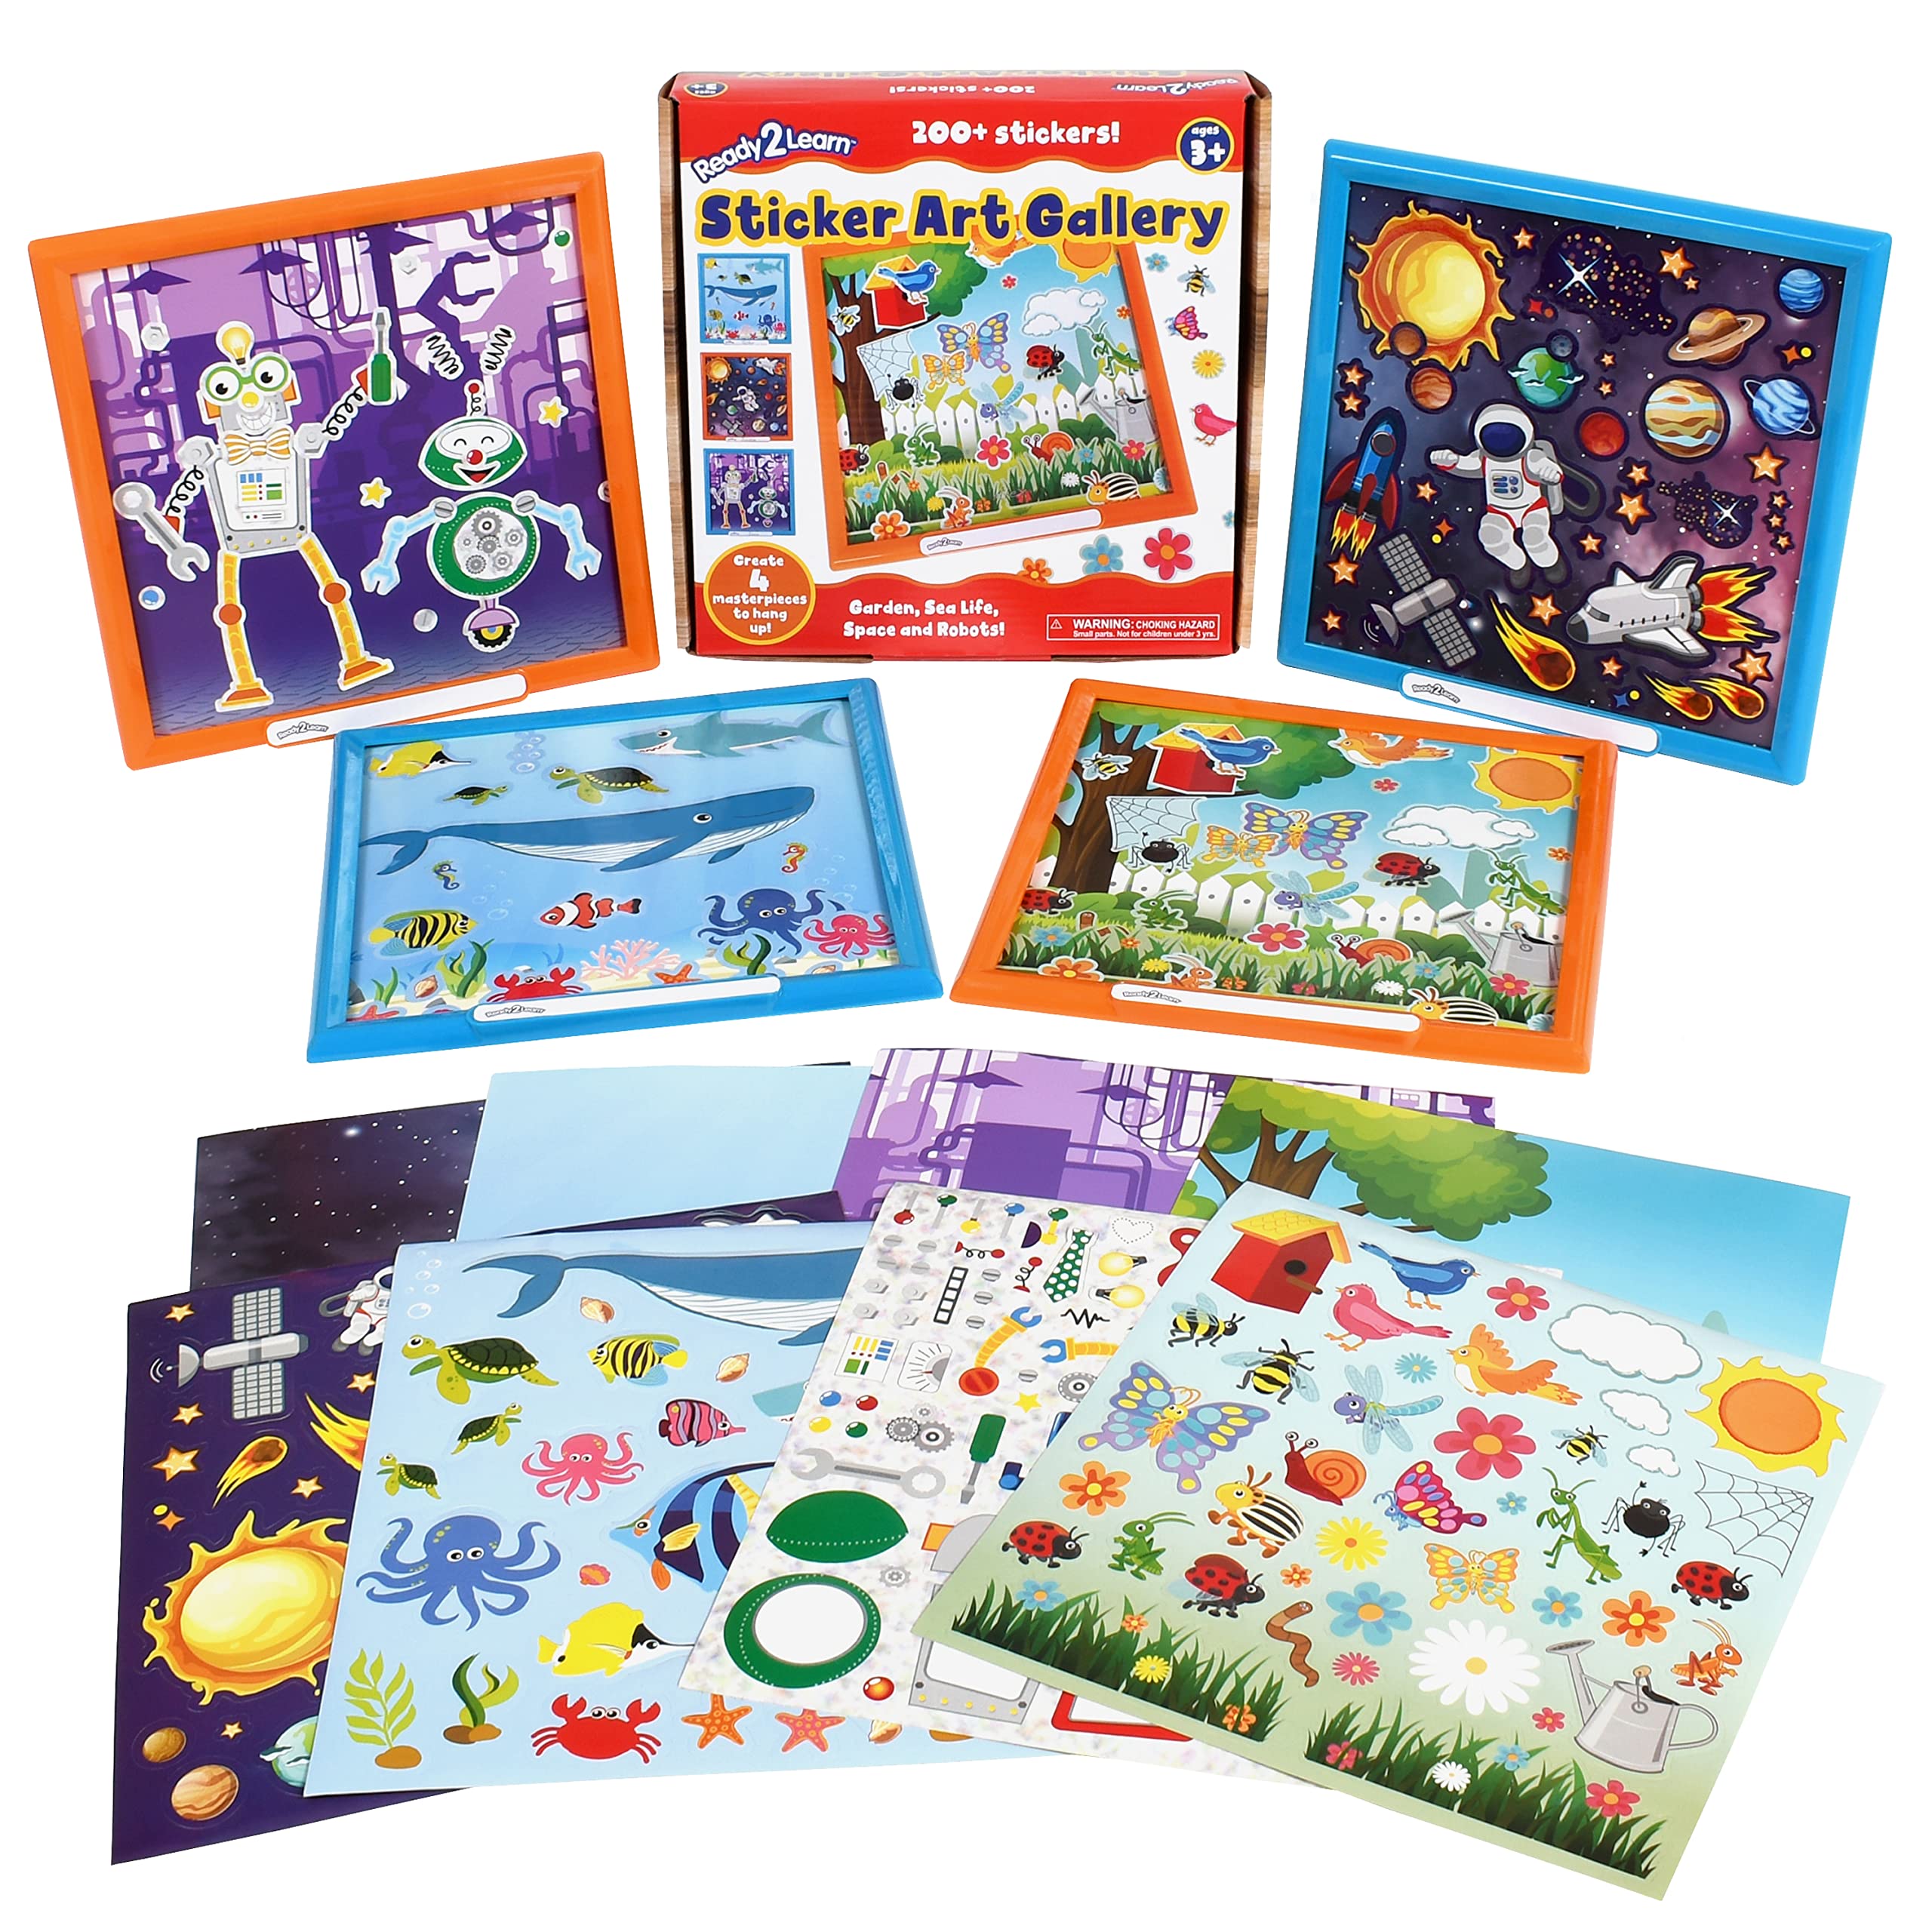 Ready2Learn Kids' Sticker Art Gallery Activity Craft Kit $4.80 + Free S&H w/ Prime or $25+